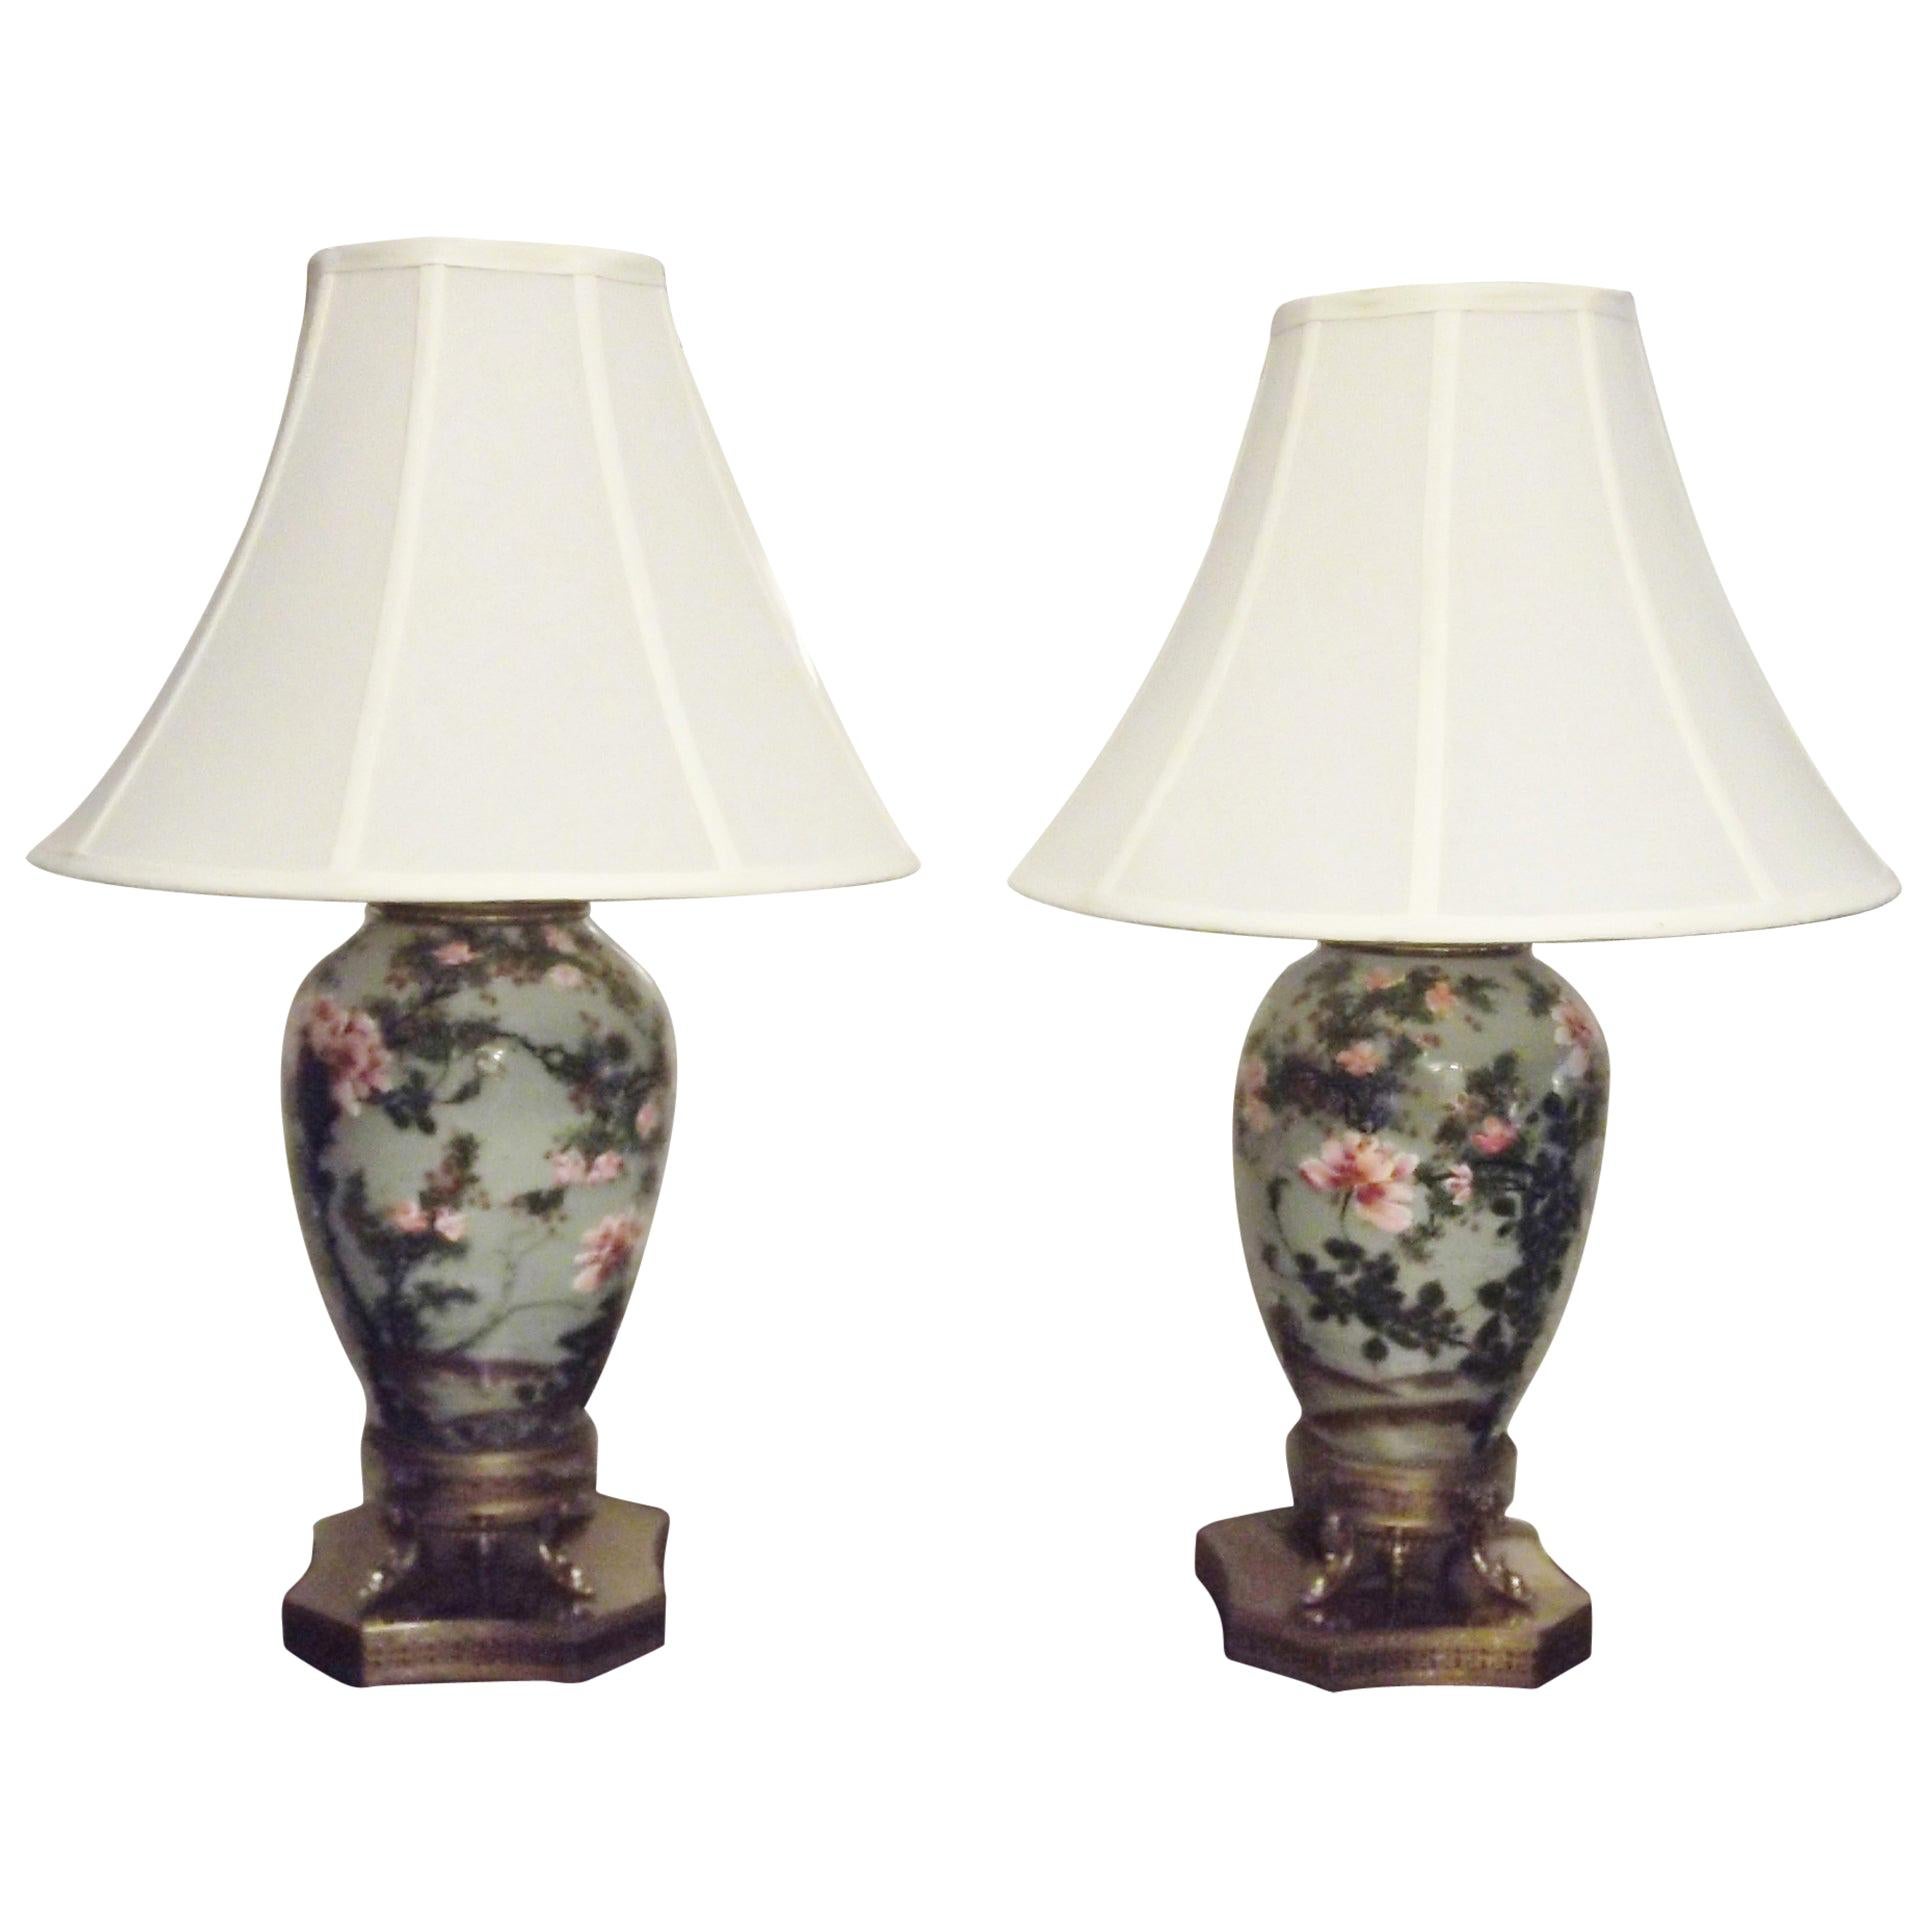 Pair of 19th Century Chinese Celadon Porcelain Lamps